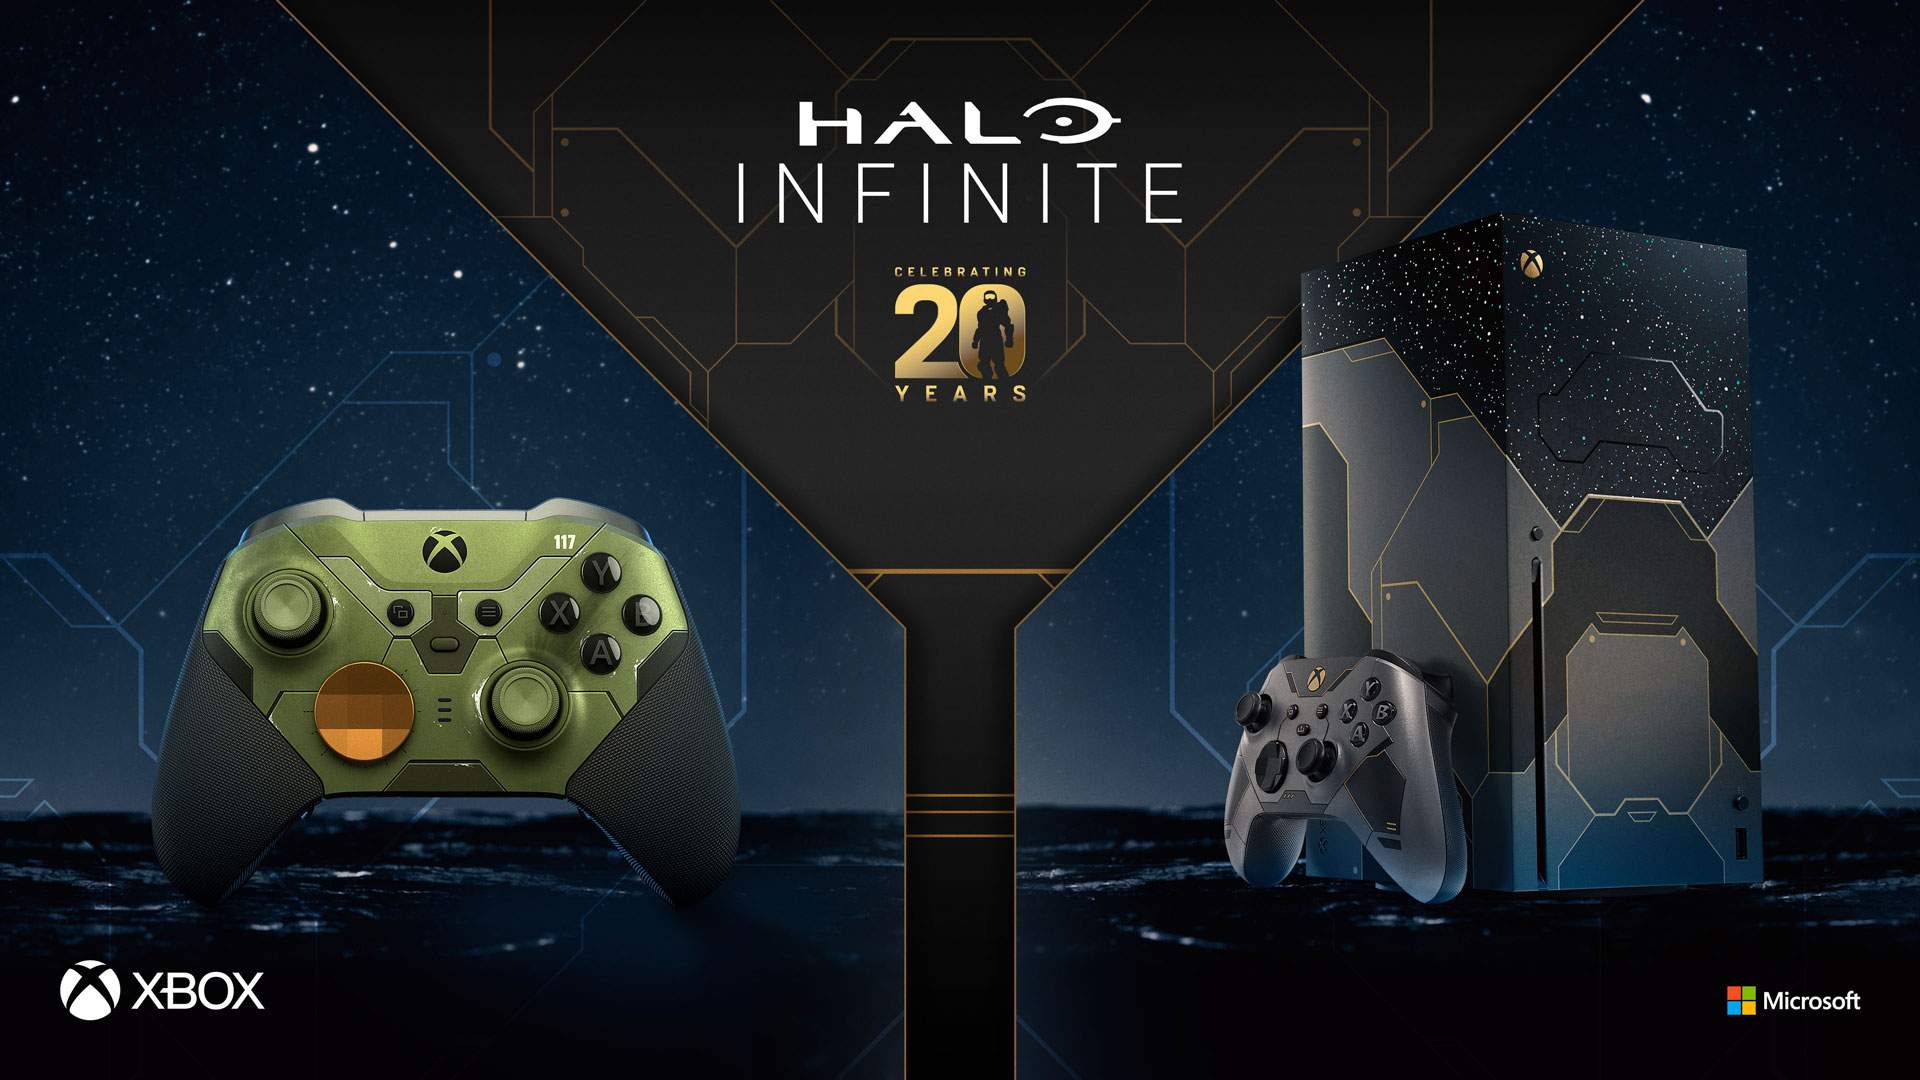 Limited edition Halo Xbox Series X and controller